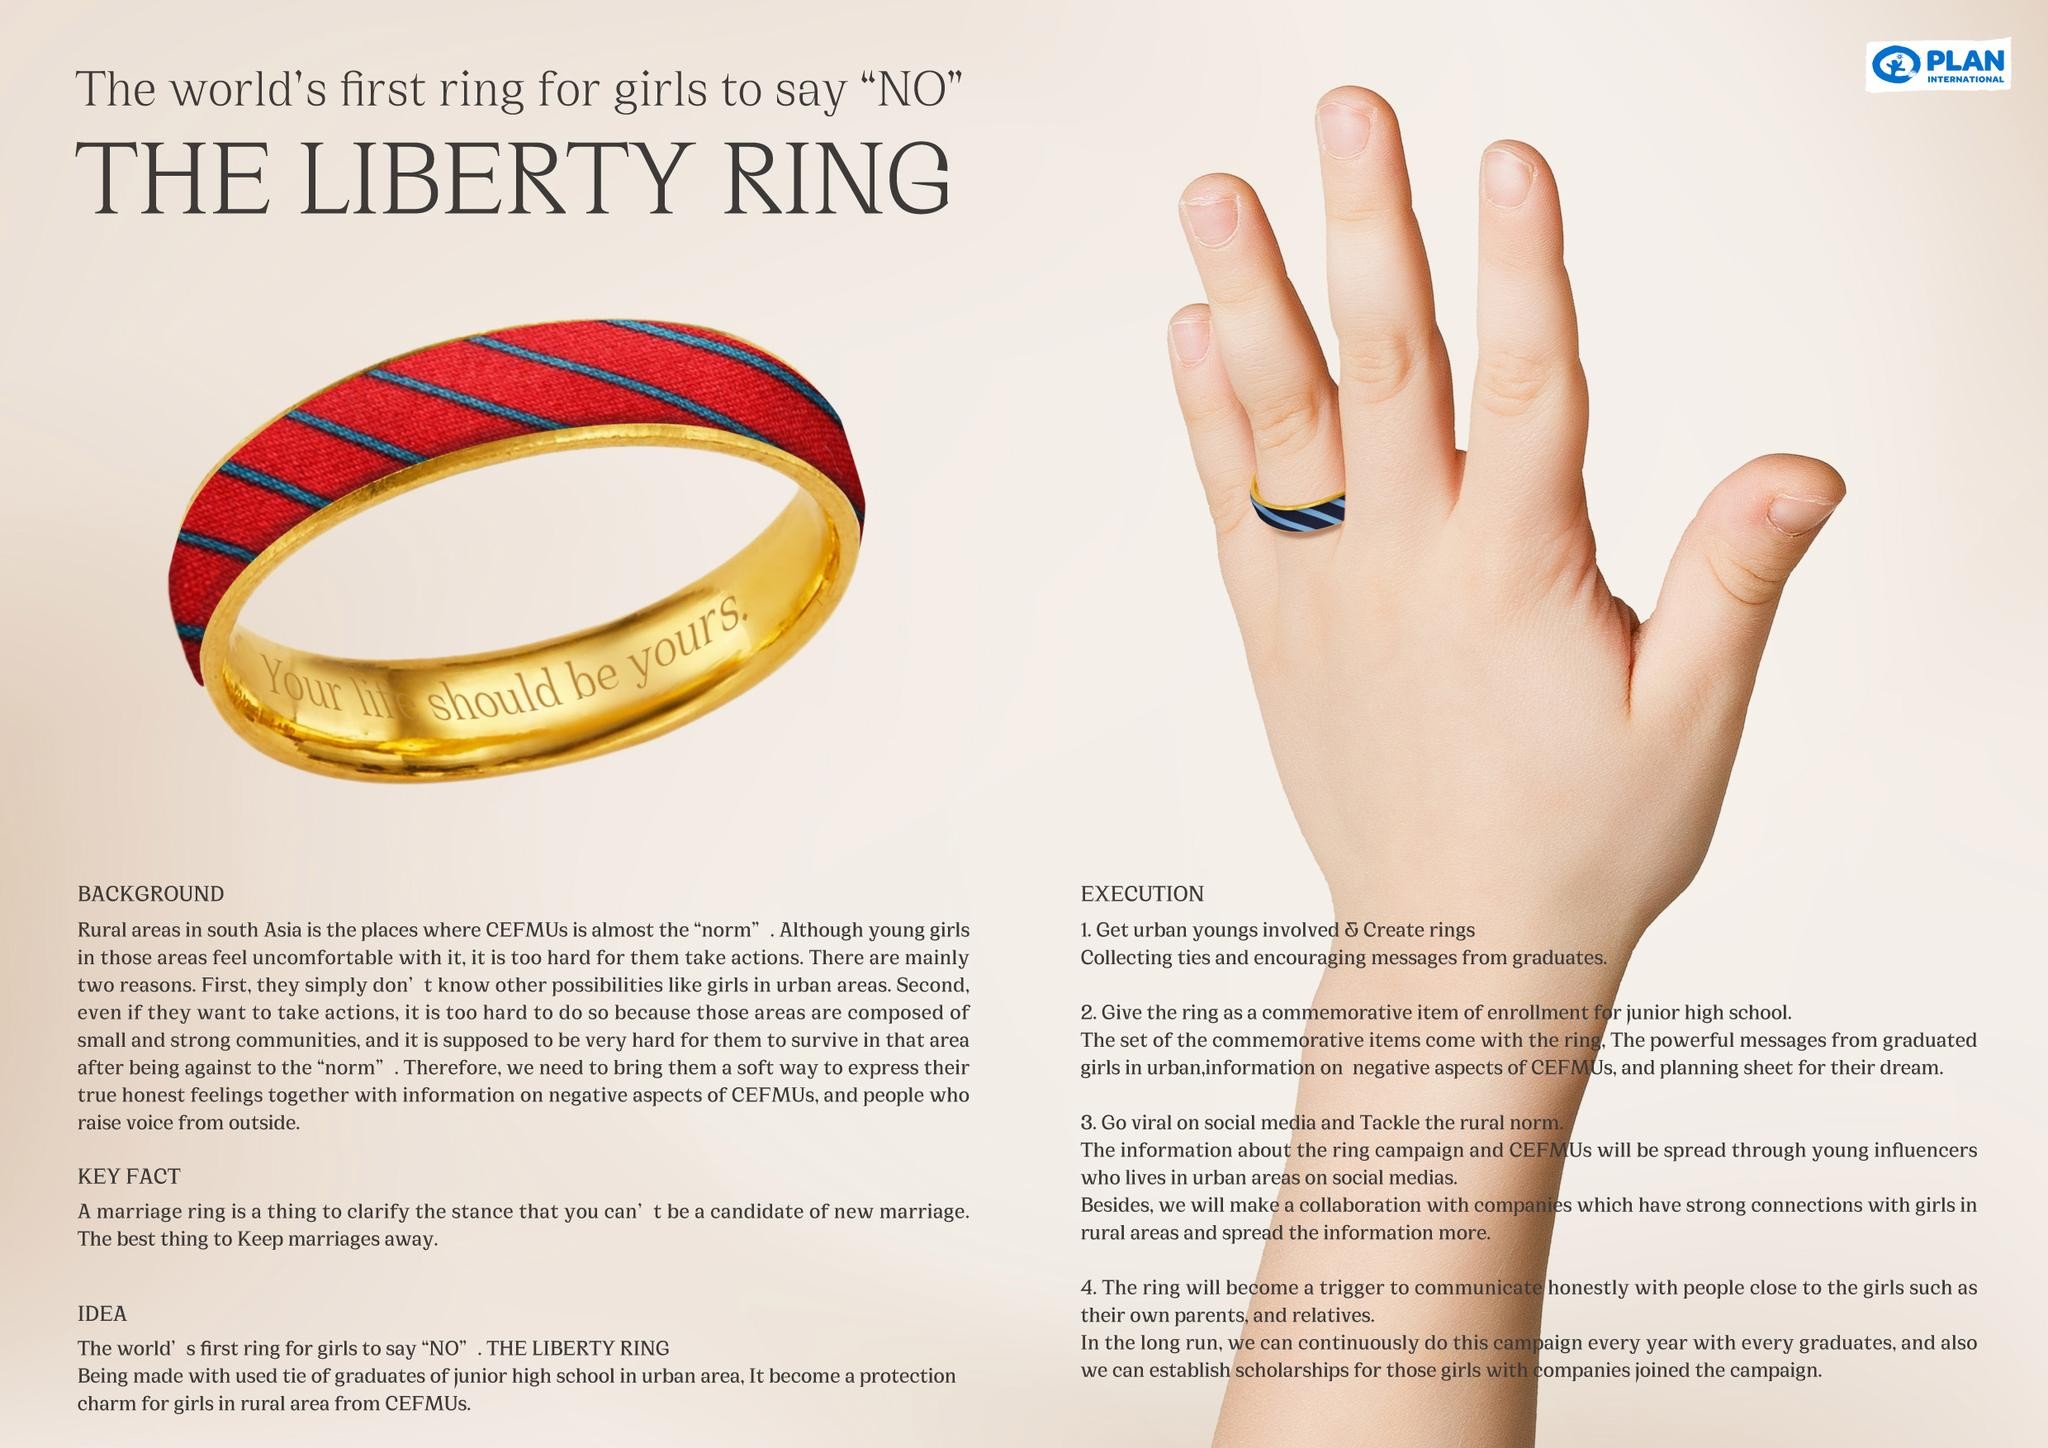 THE LIBERTY RING